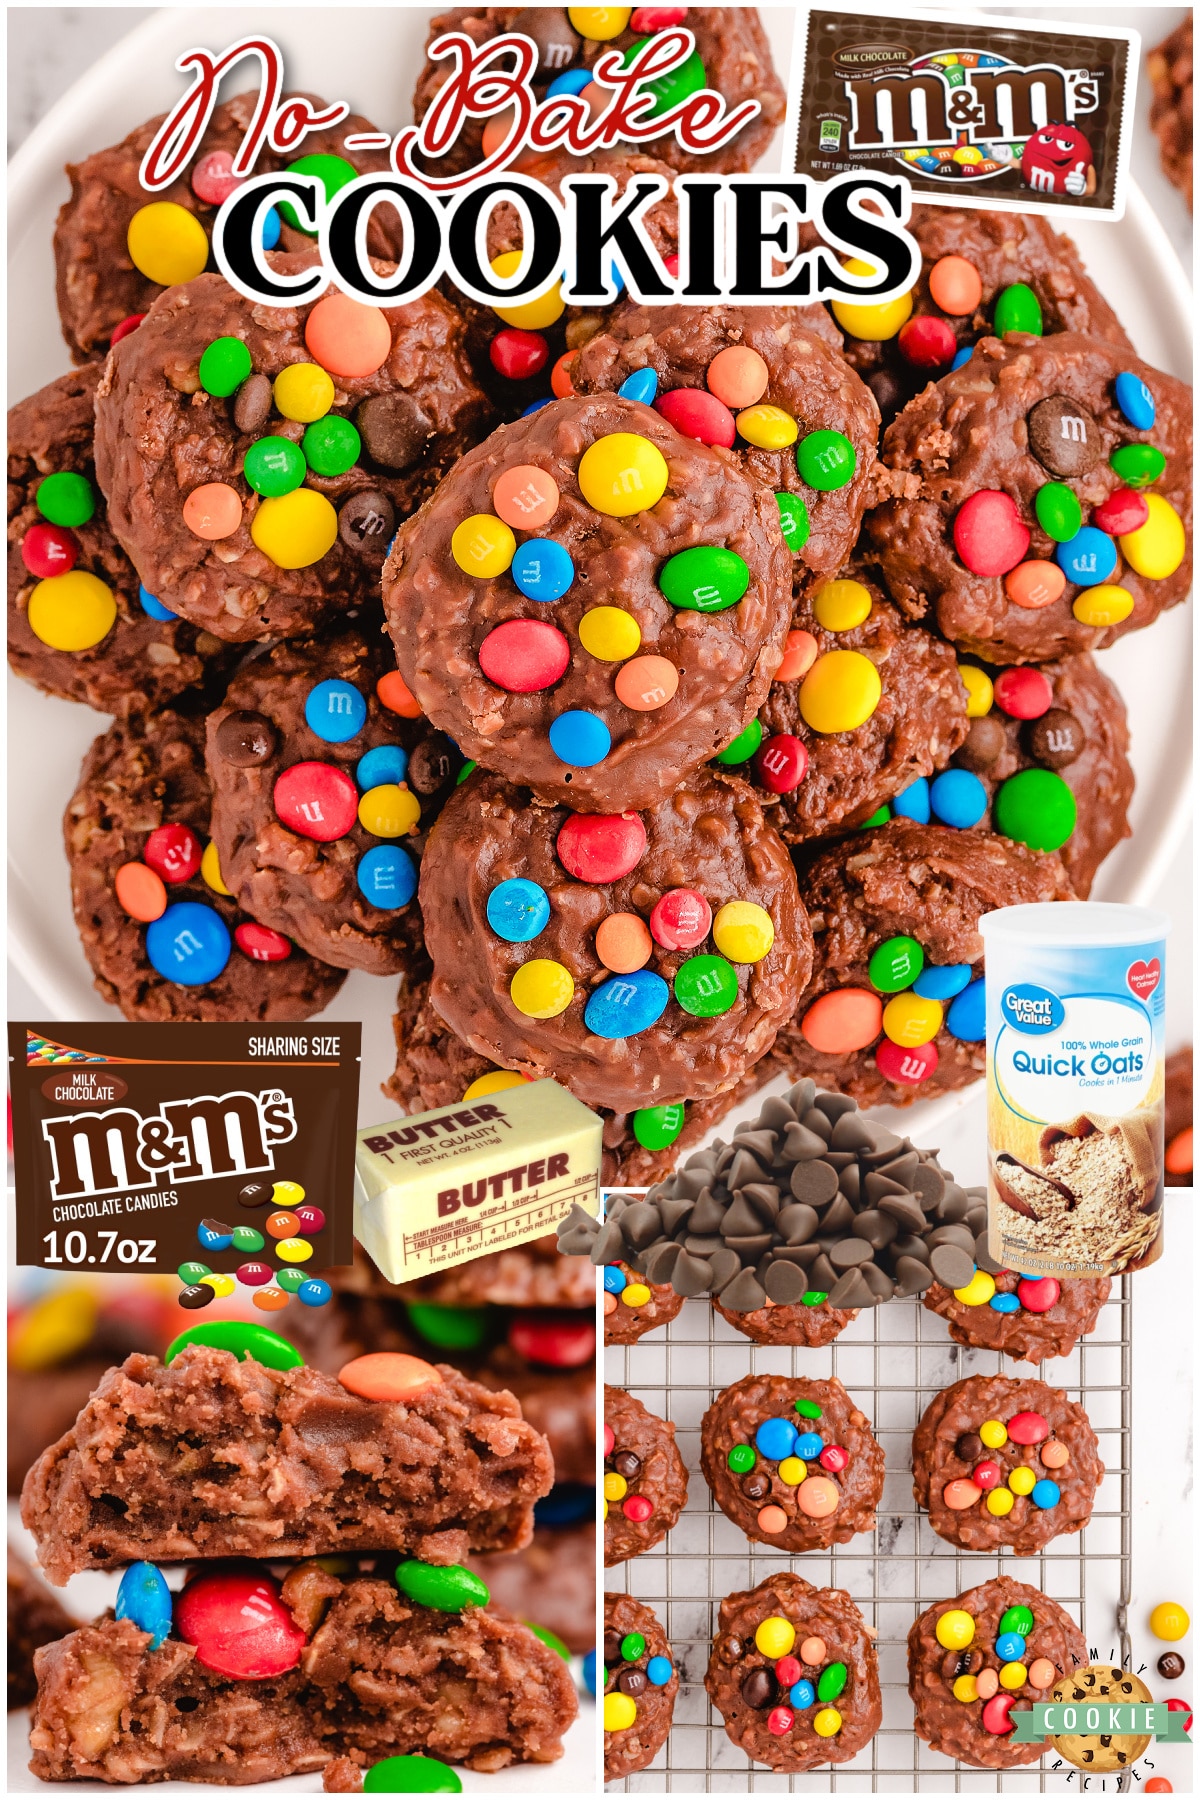 No Bake M&M Cookies are loaded with chocolate, oats, coconut & topped with M&M candies! These easy no-bake cookies are so simple to make and they have the best flavor!